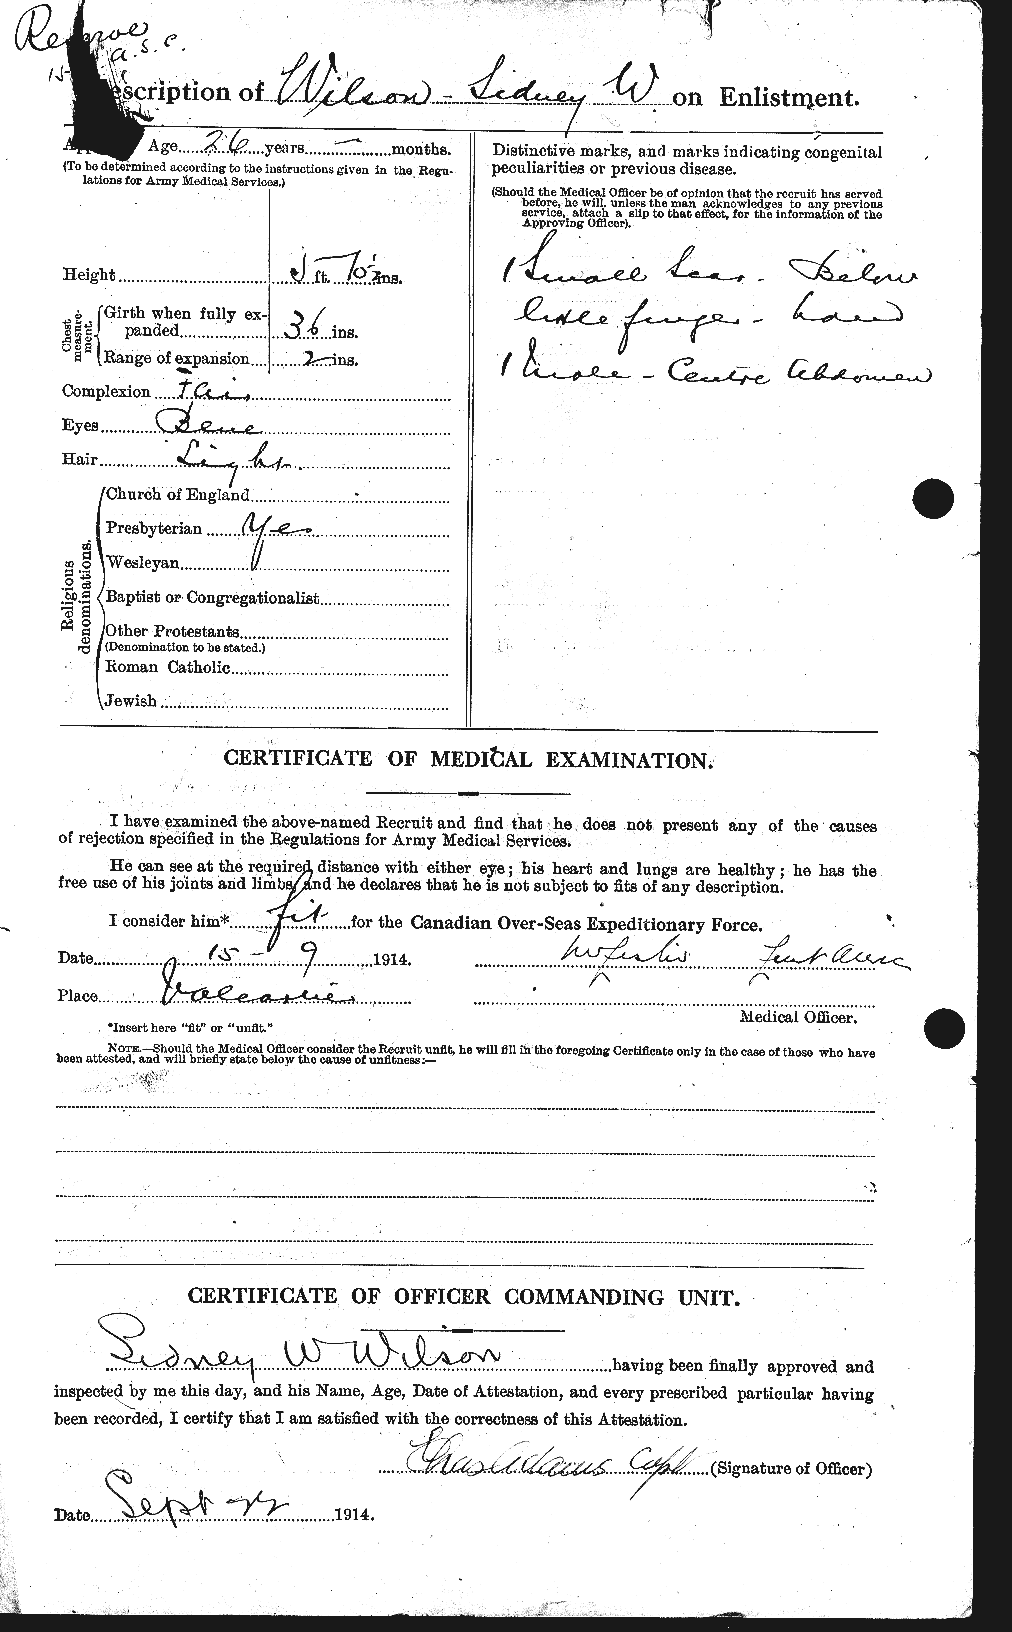 Personnel Records of the First World War - CEF 681135b